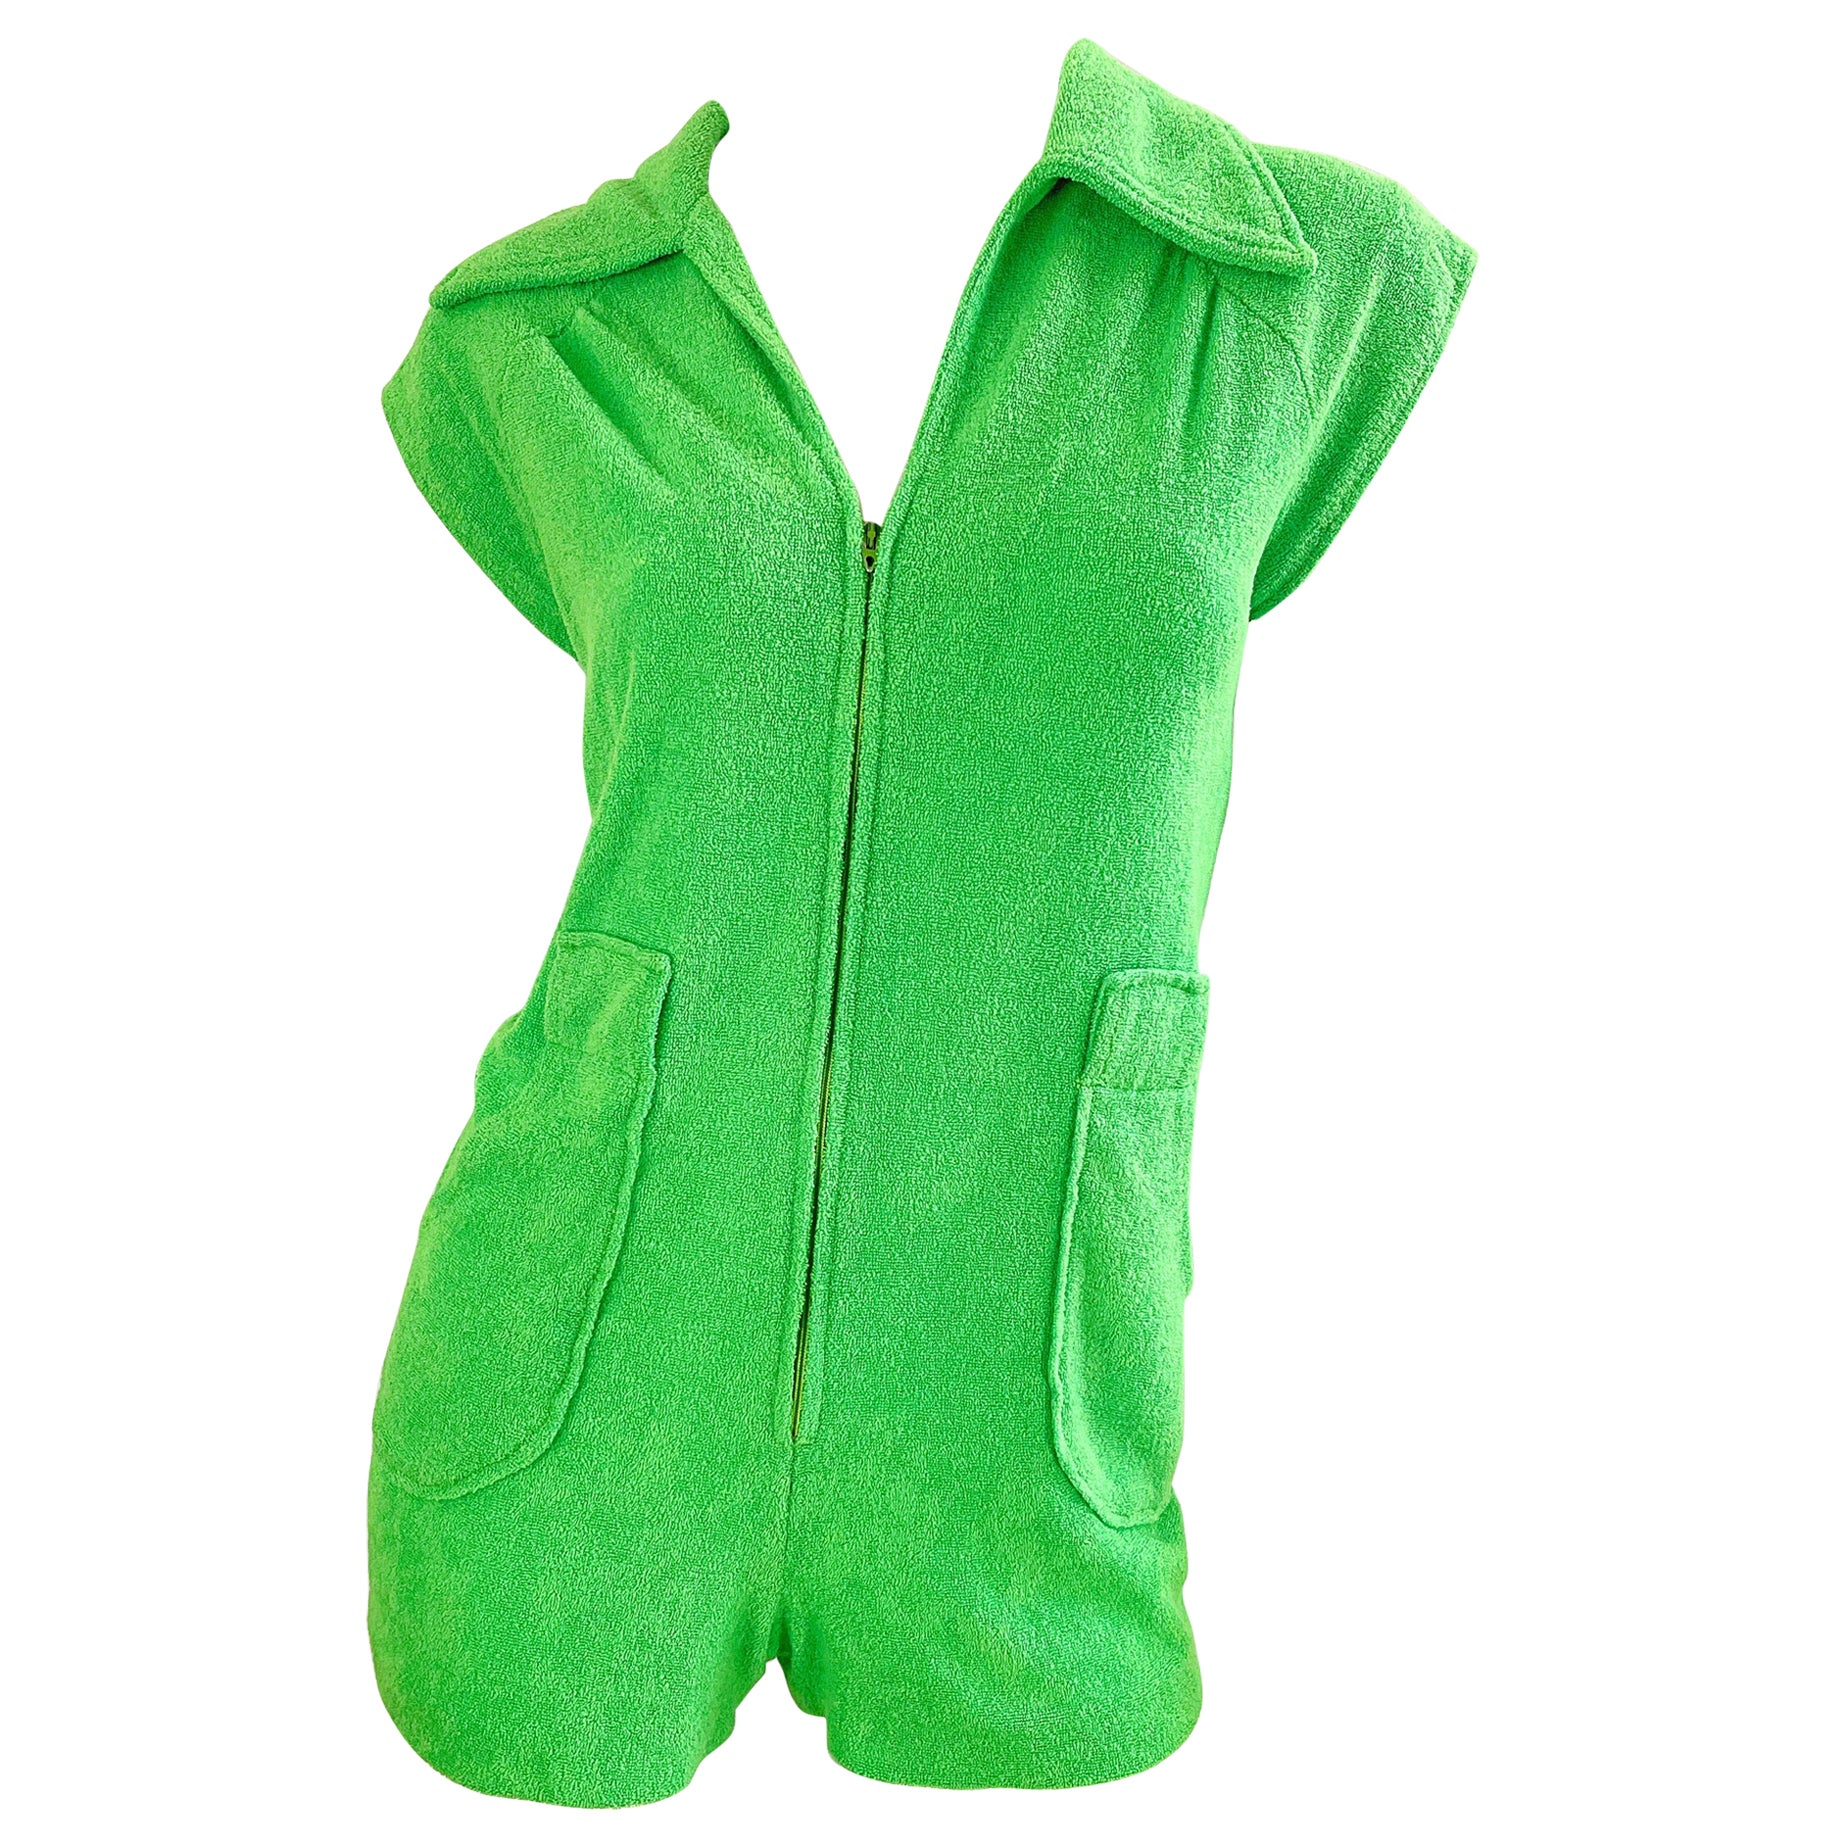 Amazing 1970s Terrycloth Neon Green Romper Vintage 70s Shorts Jumpsuit For Sale